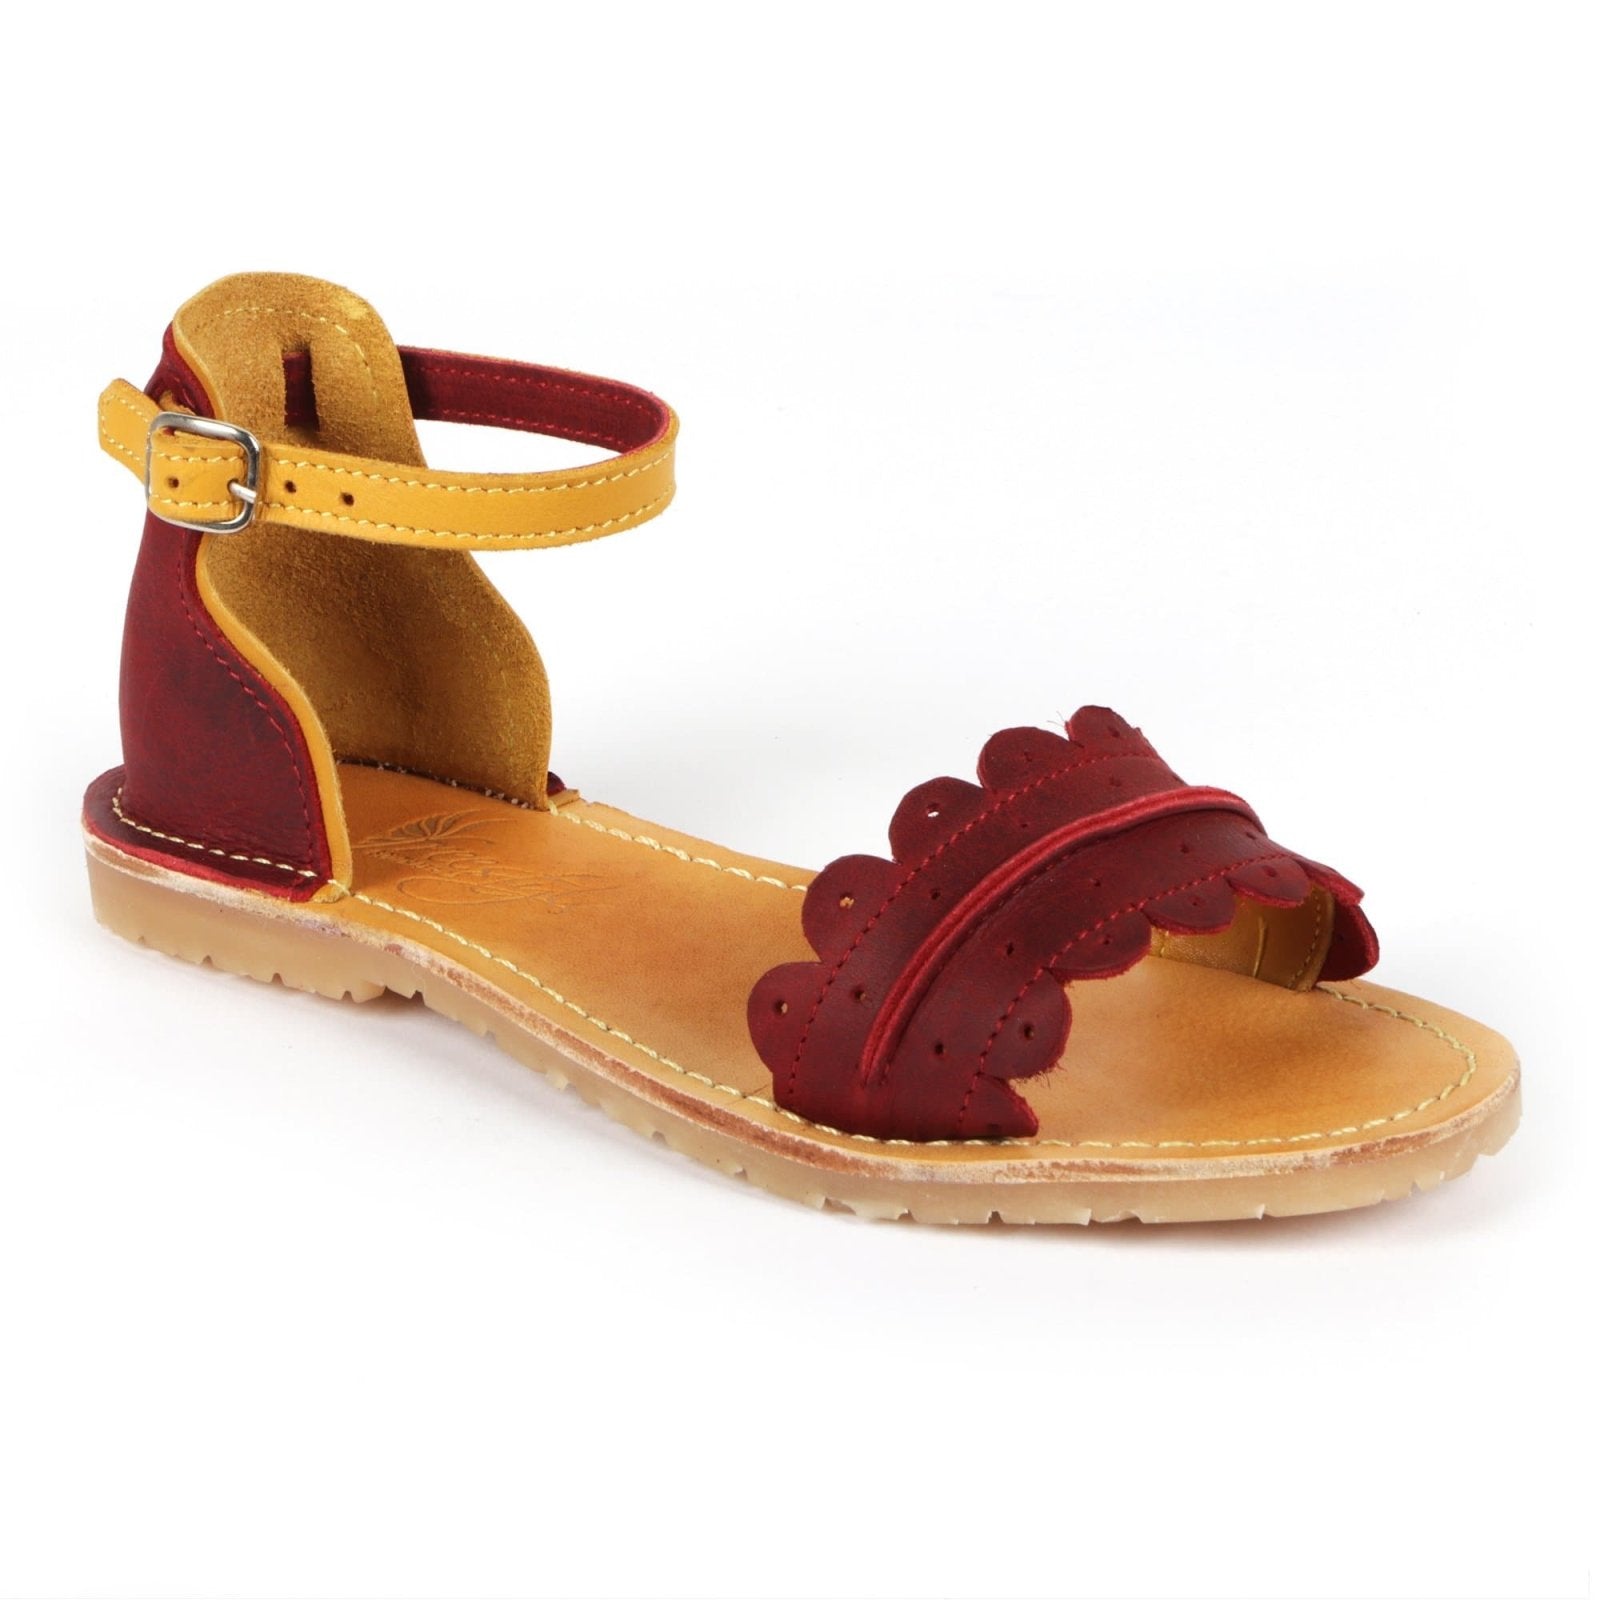 Jamie Bohemian Chic Hand-dyed summer sandal - Freestyle SA Proudly local leather boots veldskoens vellies leather shoes suede veldskoens